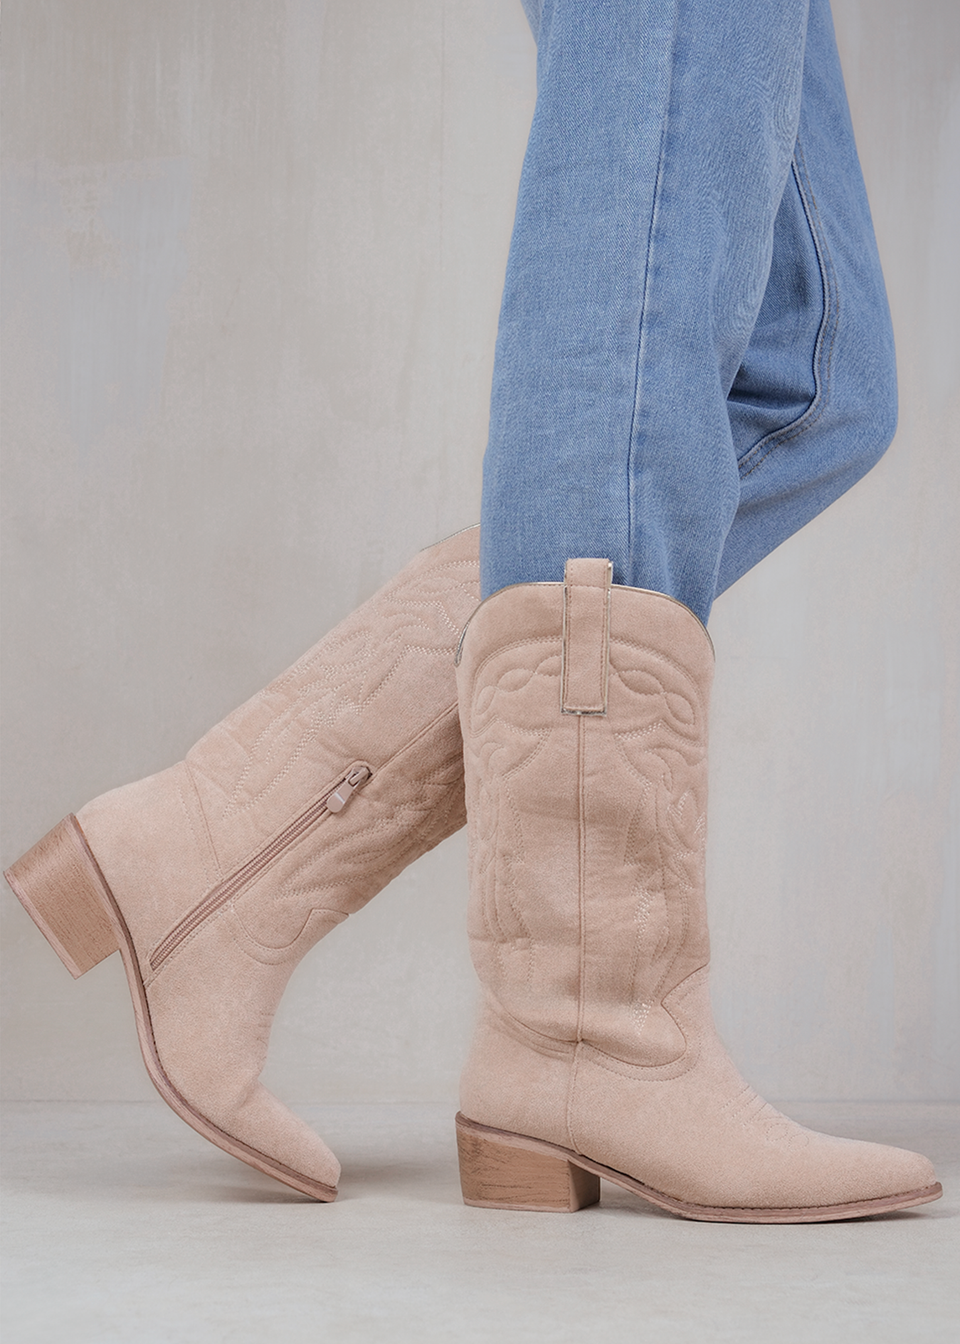 Where's That From Beige Suede Desert Cowboy Boots With Embroidery